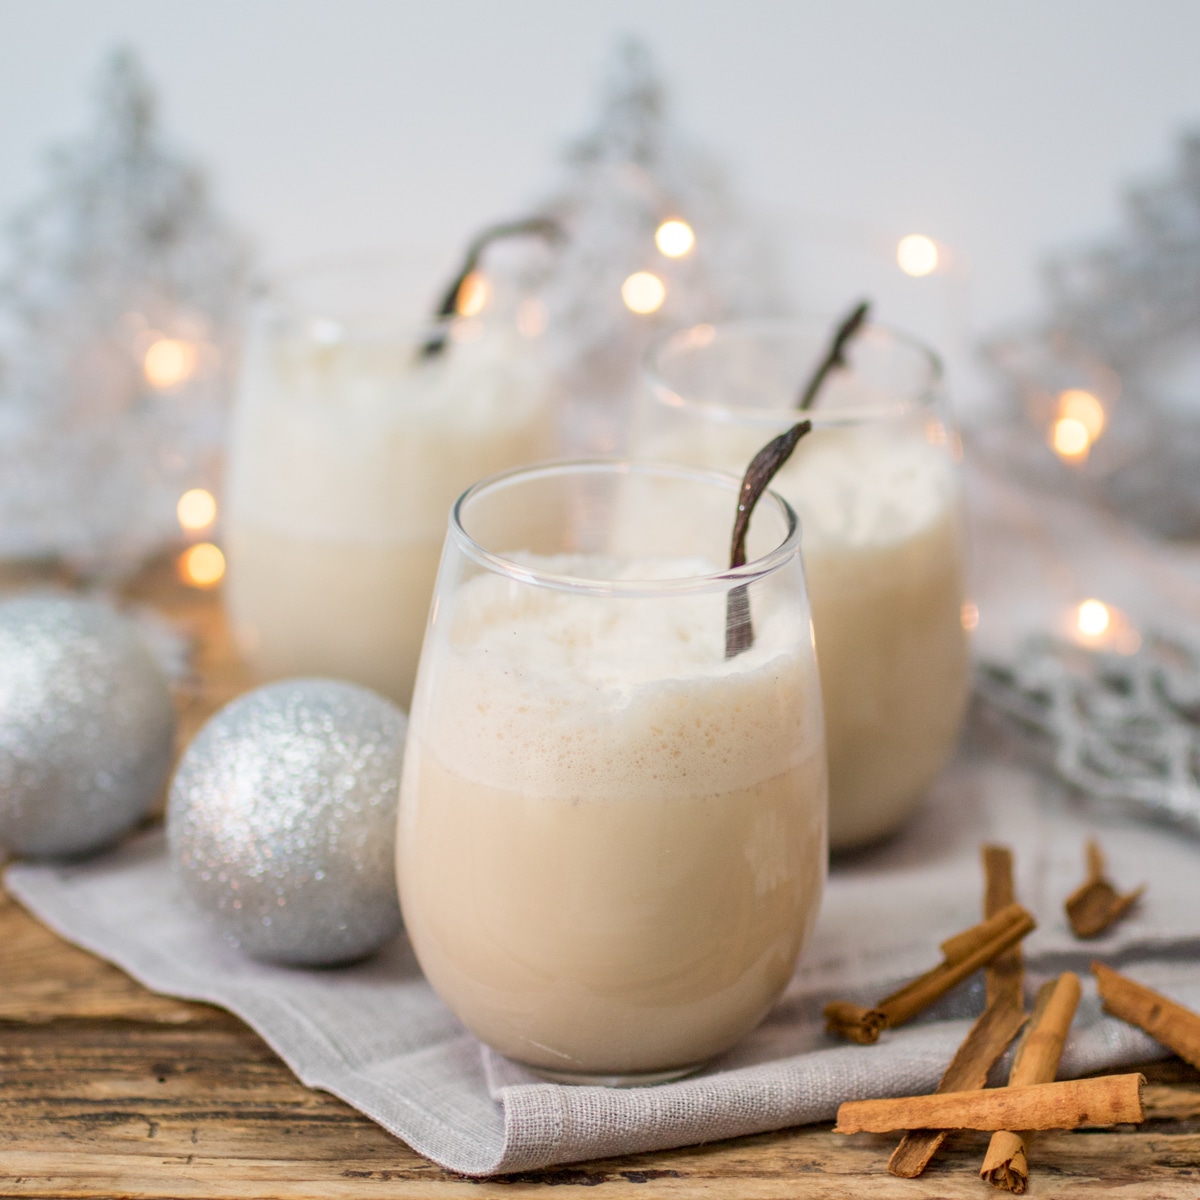 How To Make Eggnog with Rum and Ginger